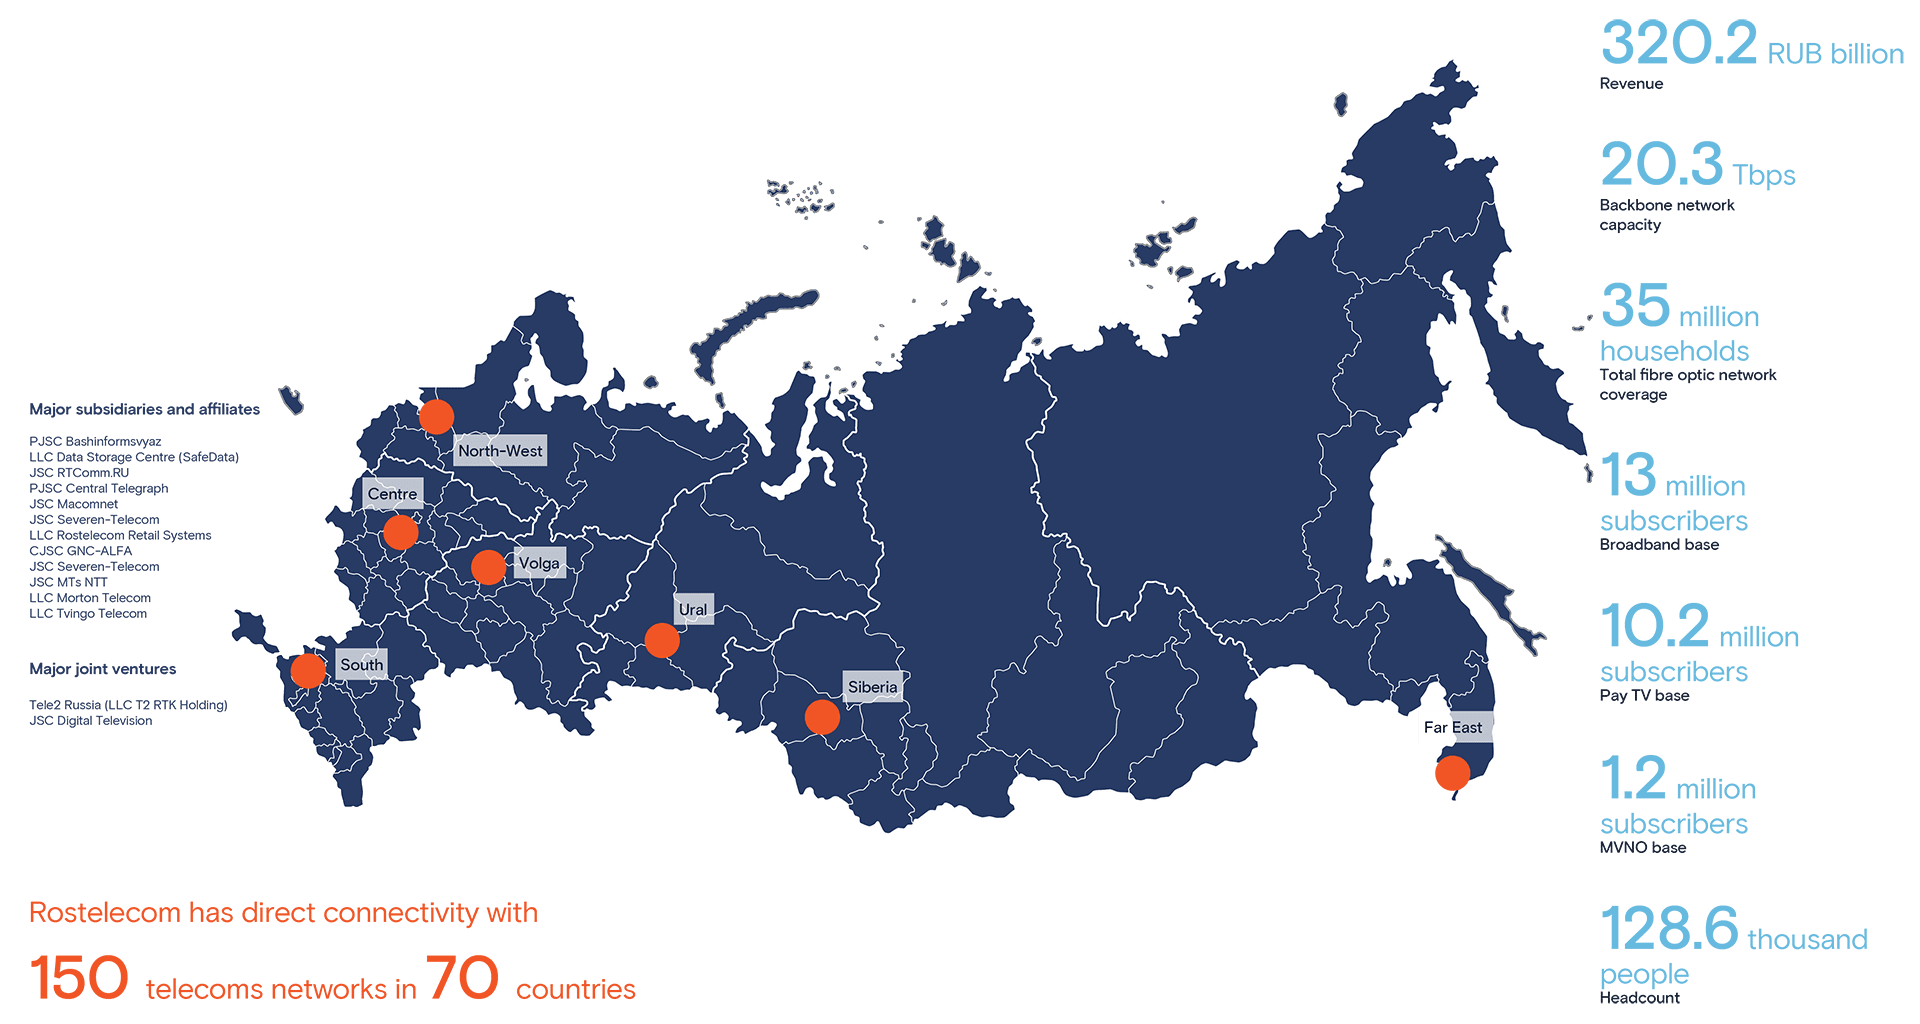 Rostelecom’s Structure and Geography of Operations